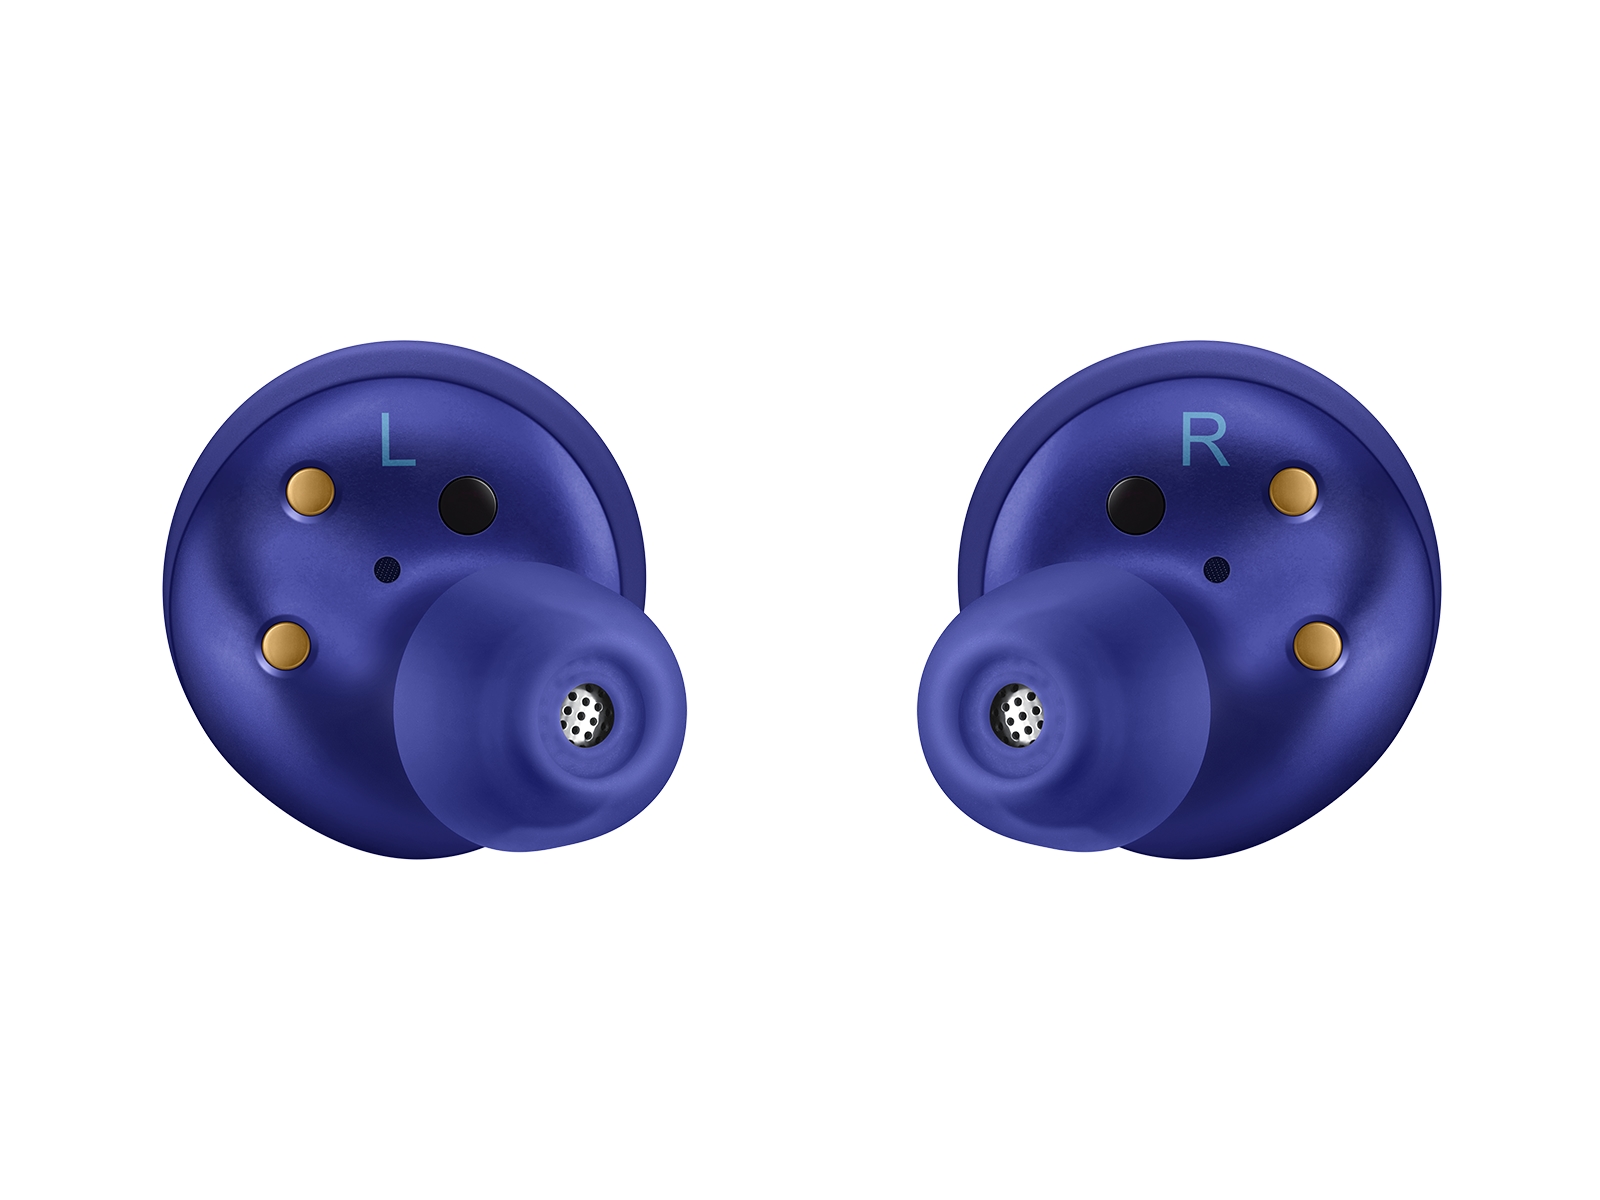 https://image-us.samsung.com/SamsungUS/home/mobile/audio/headphones/pdp/sm-r175nmbaxar/gallery/WASR_Aura_Blue_Galaxy_Buds_Back_Gallery_Card_1600x1200.png?$720_576_PNG$